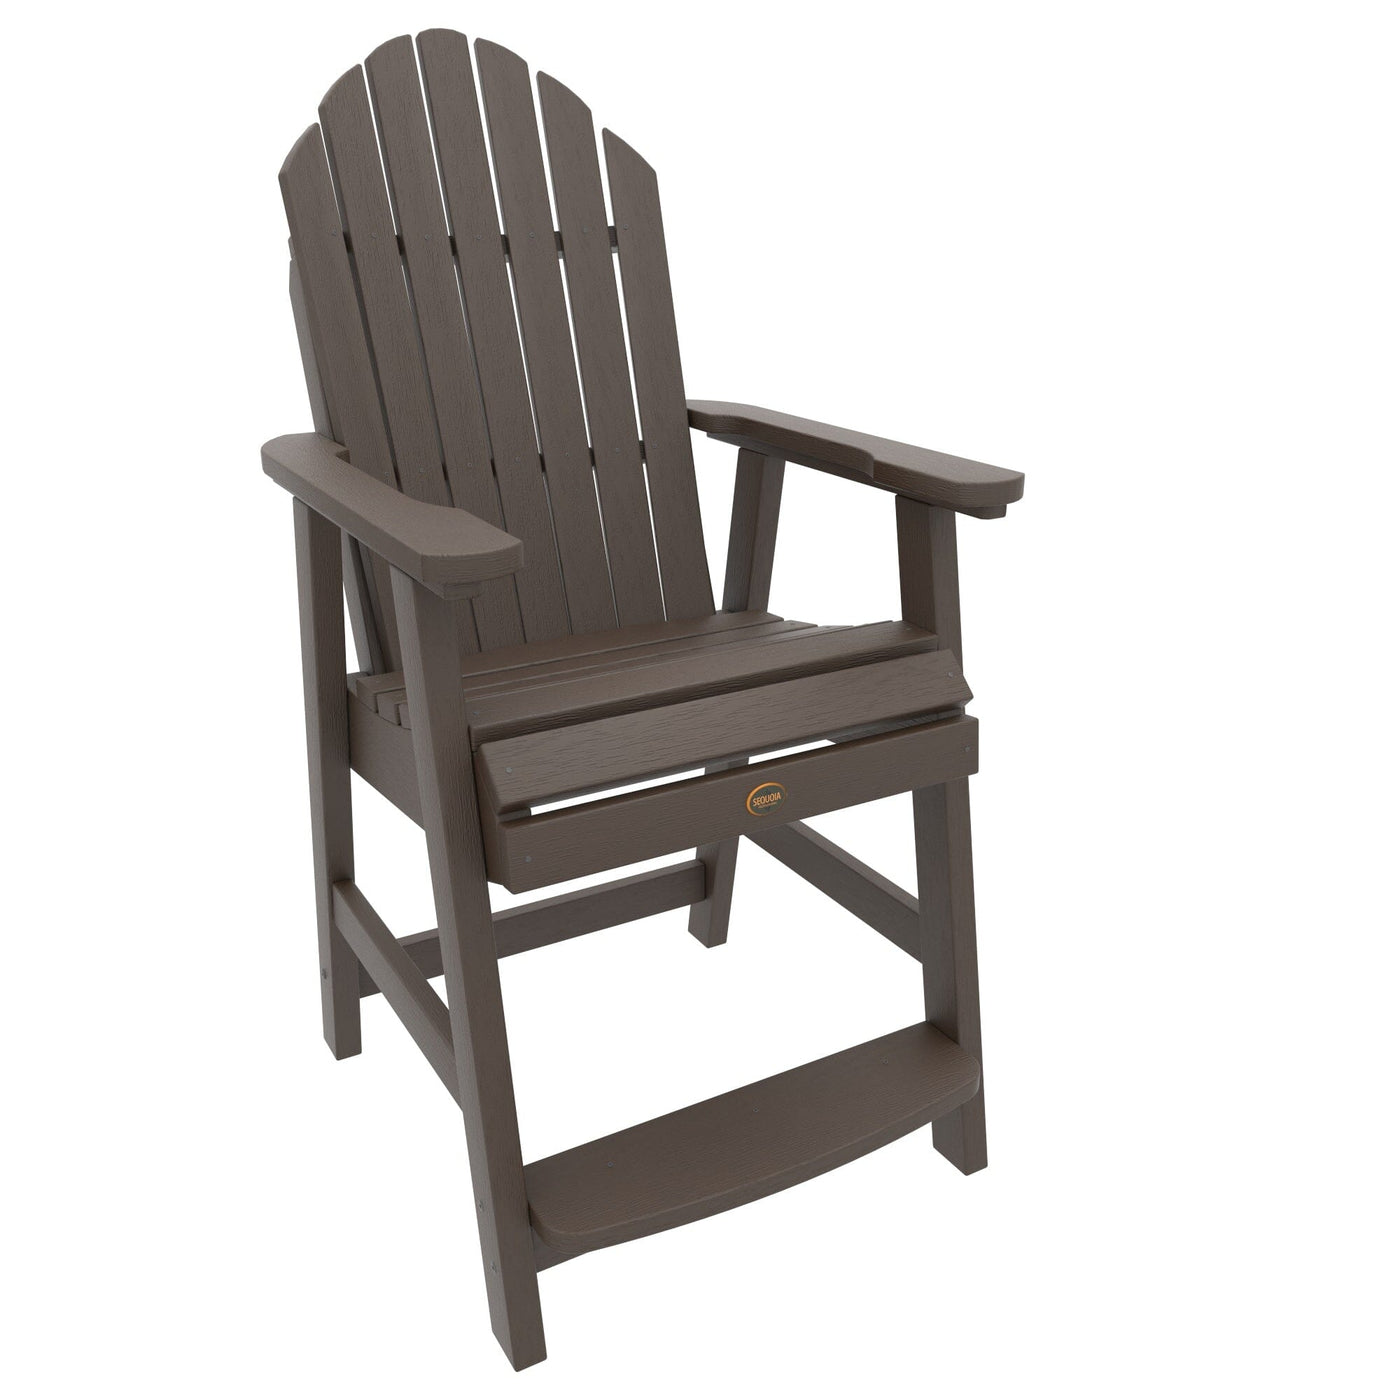 Commercial Grade Muskoka Adirondack Deck Dining Chair in Counter Height Adirondack Chairs Sequoia Professional Weathered Acorn 